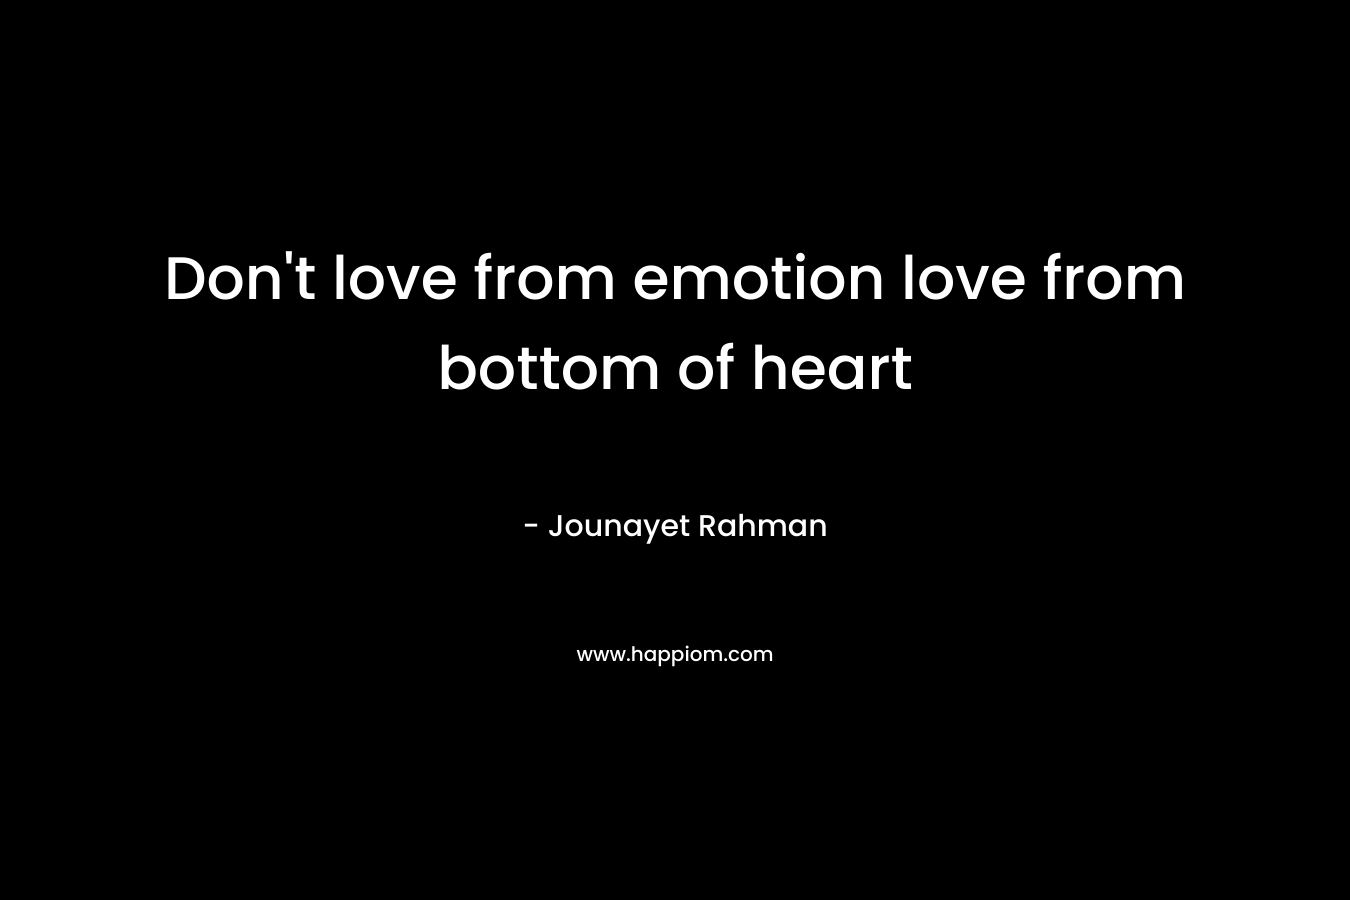 Don't love from emotion love from bottom of heart